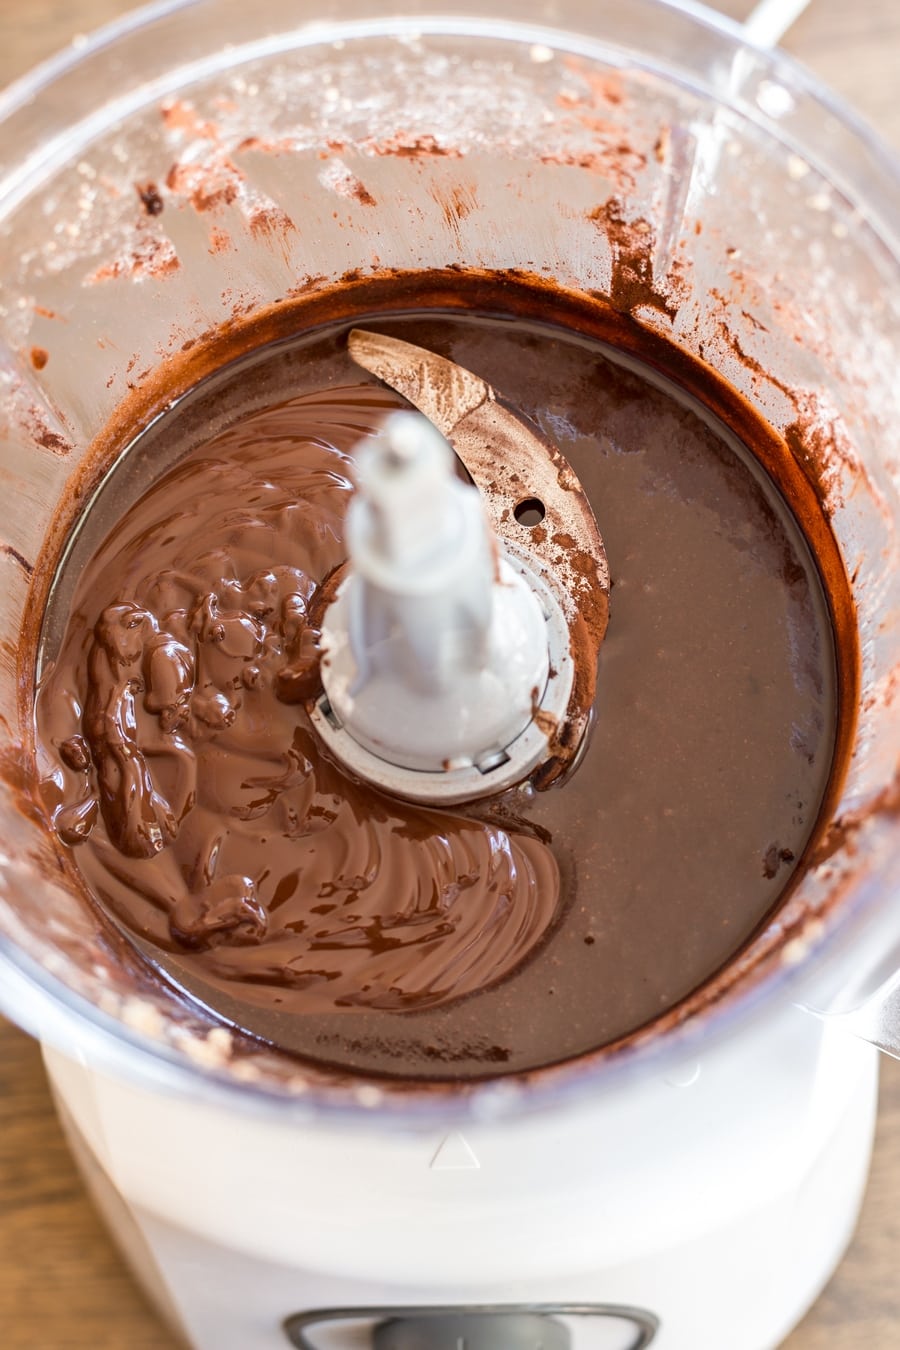 Melted dark chocolate is added to cocoa hazelnut paste to make homemade nutella.